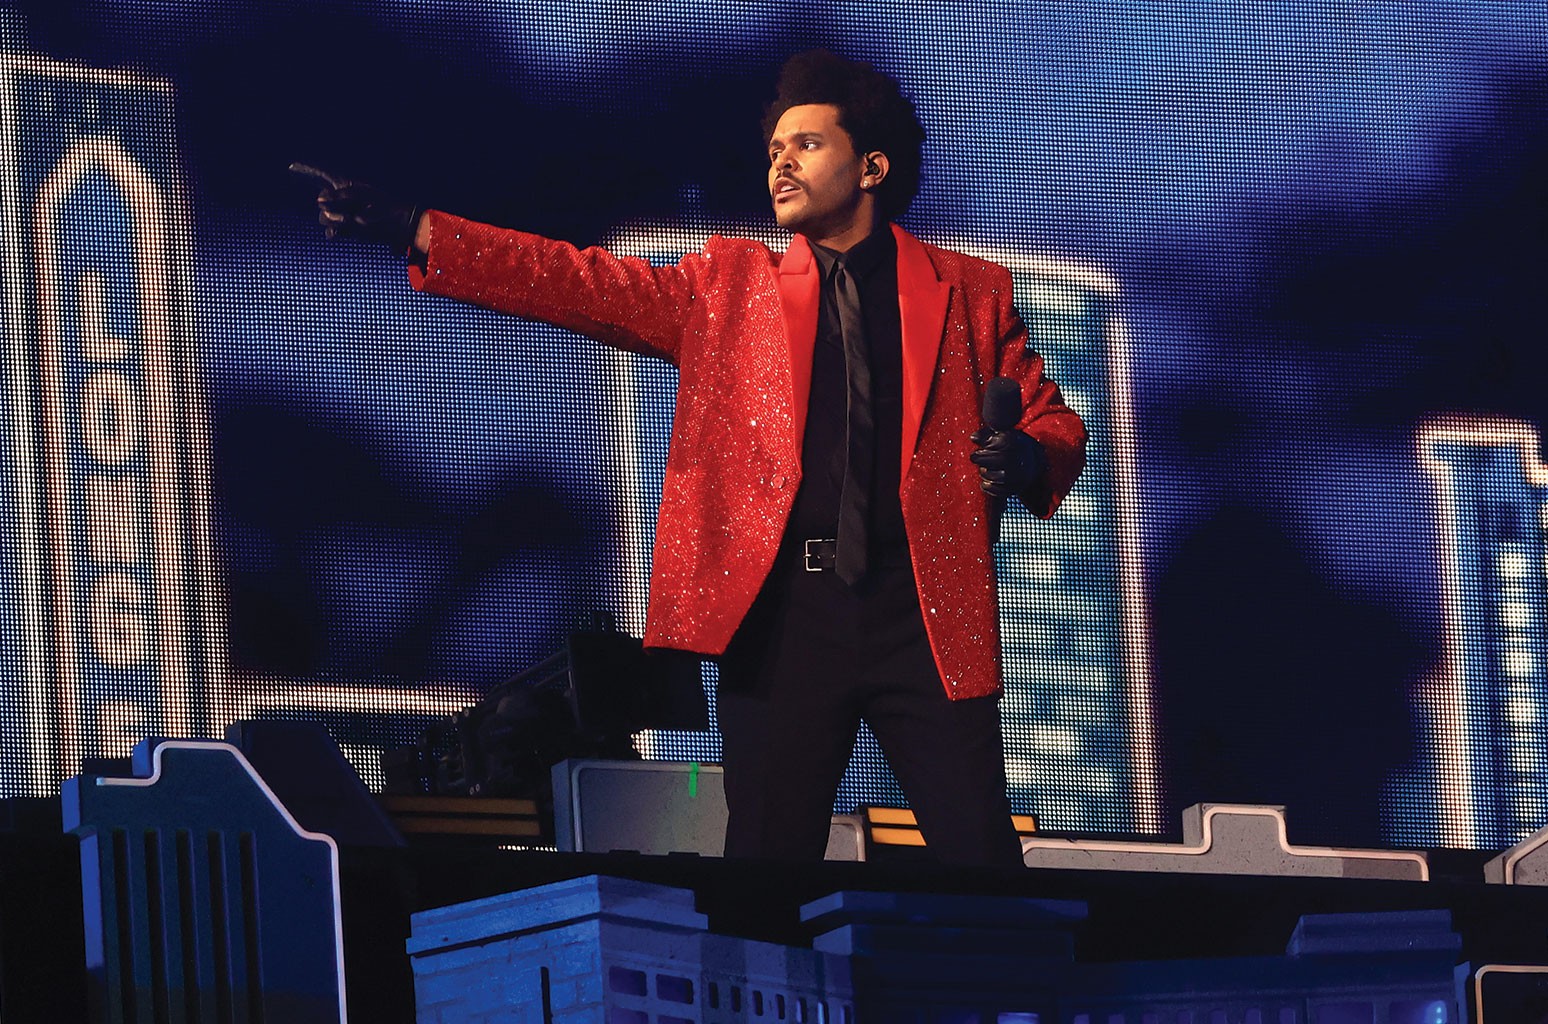 The Weeknd’s ‘Blinding Lights’ breaks US chart records, spending 88 weeks in the Hot 100